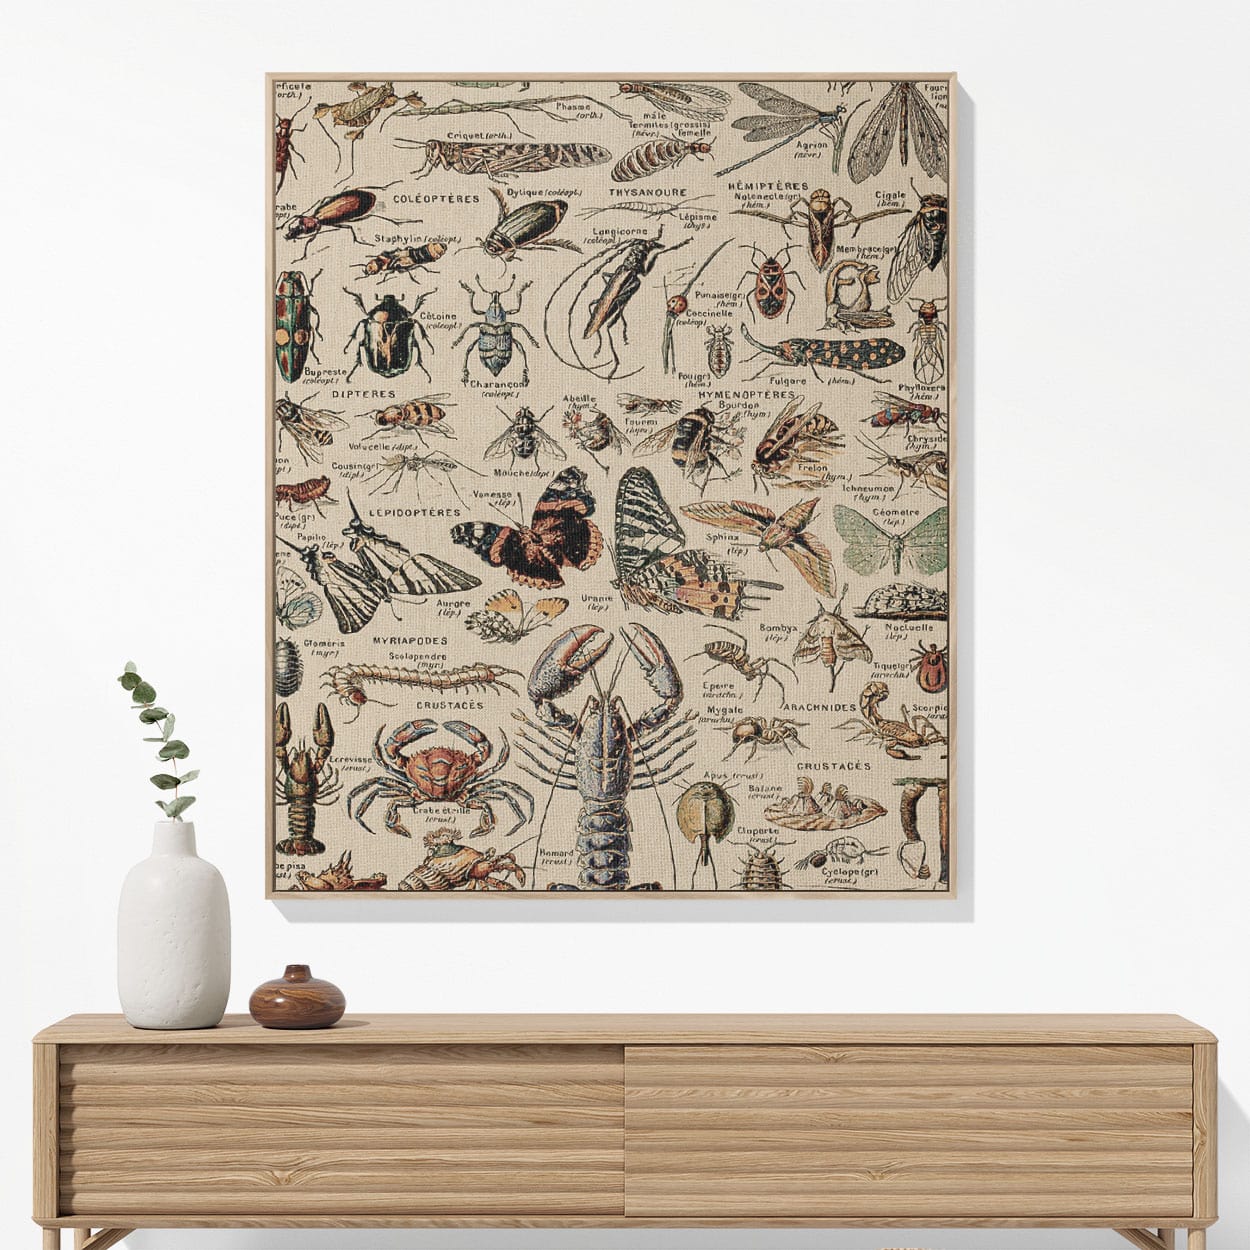 Cool Insect Woven Blanket Woven Blanket Hanging on a Wall as Framed Wall Art